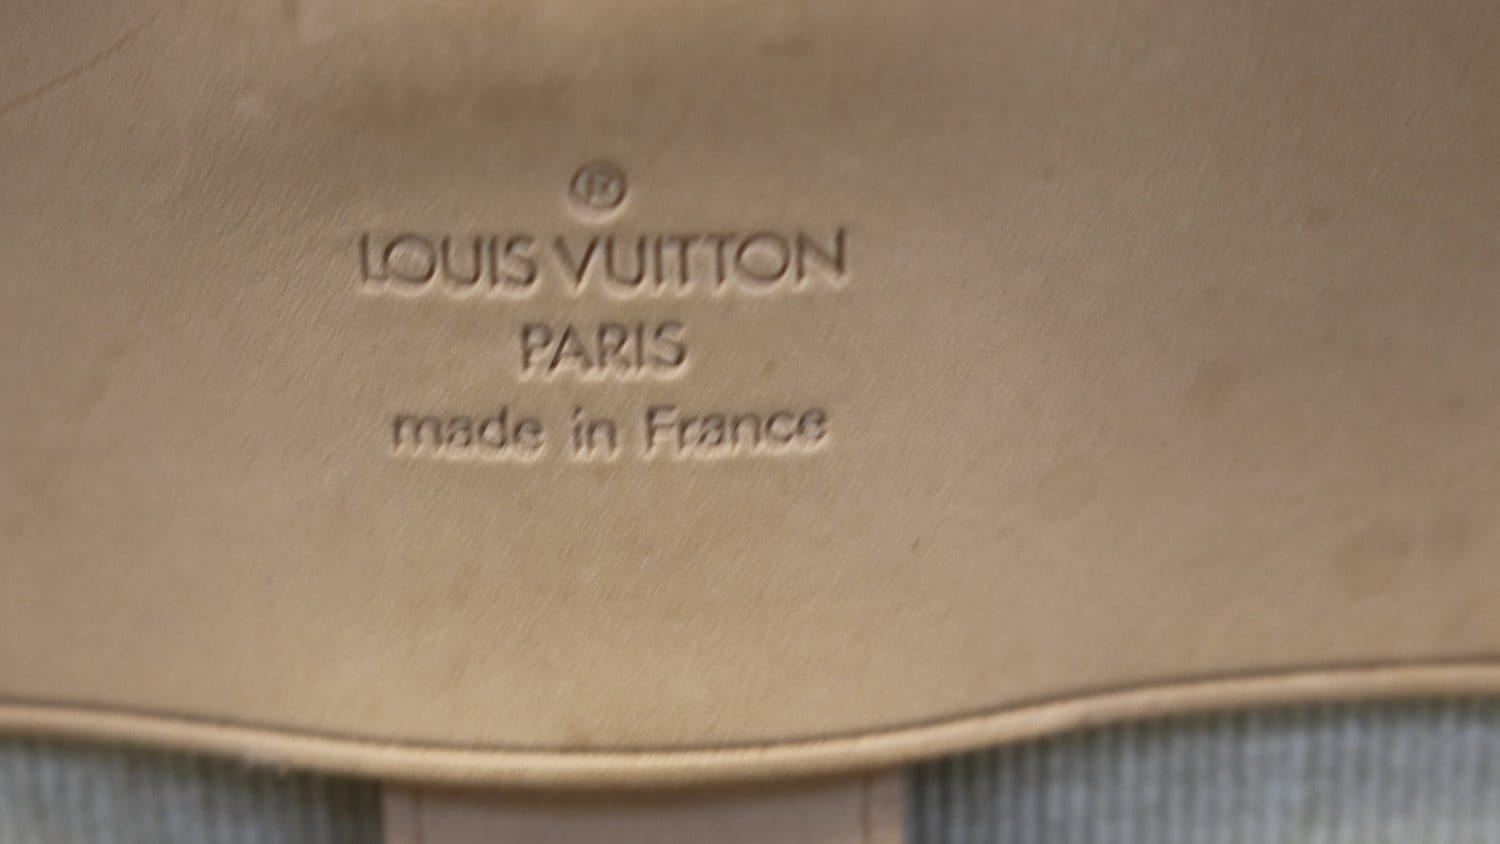 Louis Vuitton - Sirius 55 – Every Watch Has a Story